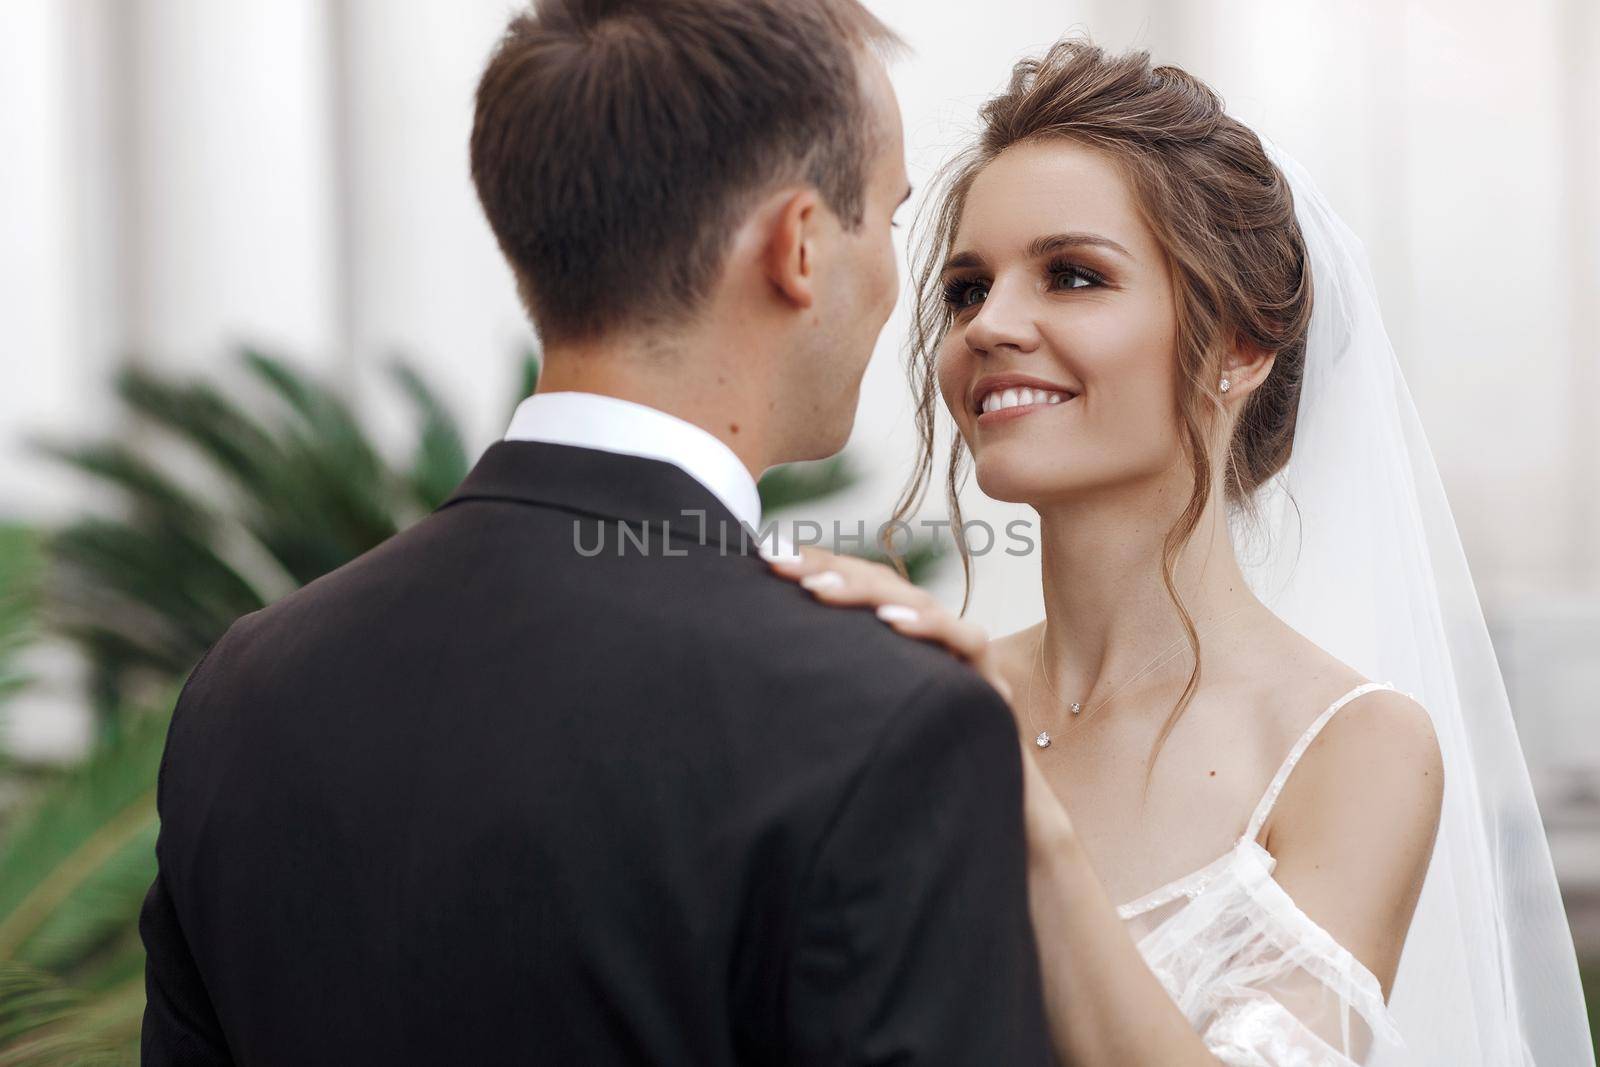 Wedding portrait of a smiling bride and groom. High quality photo